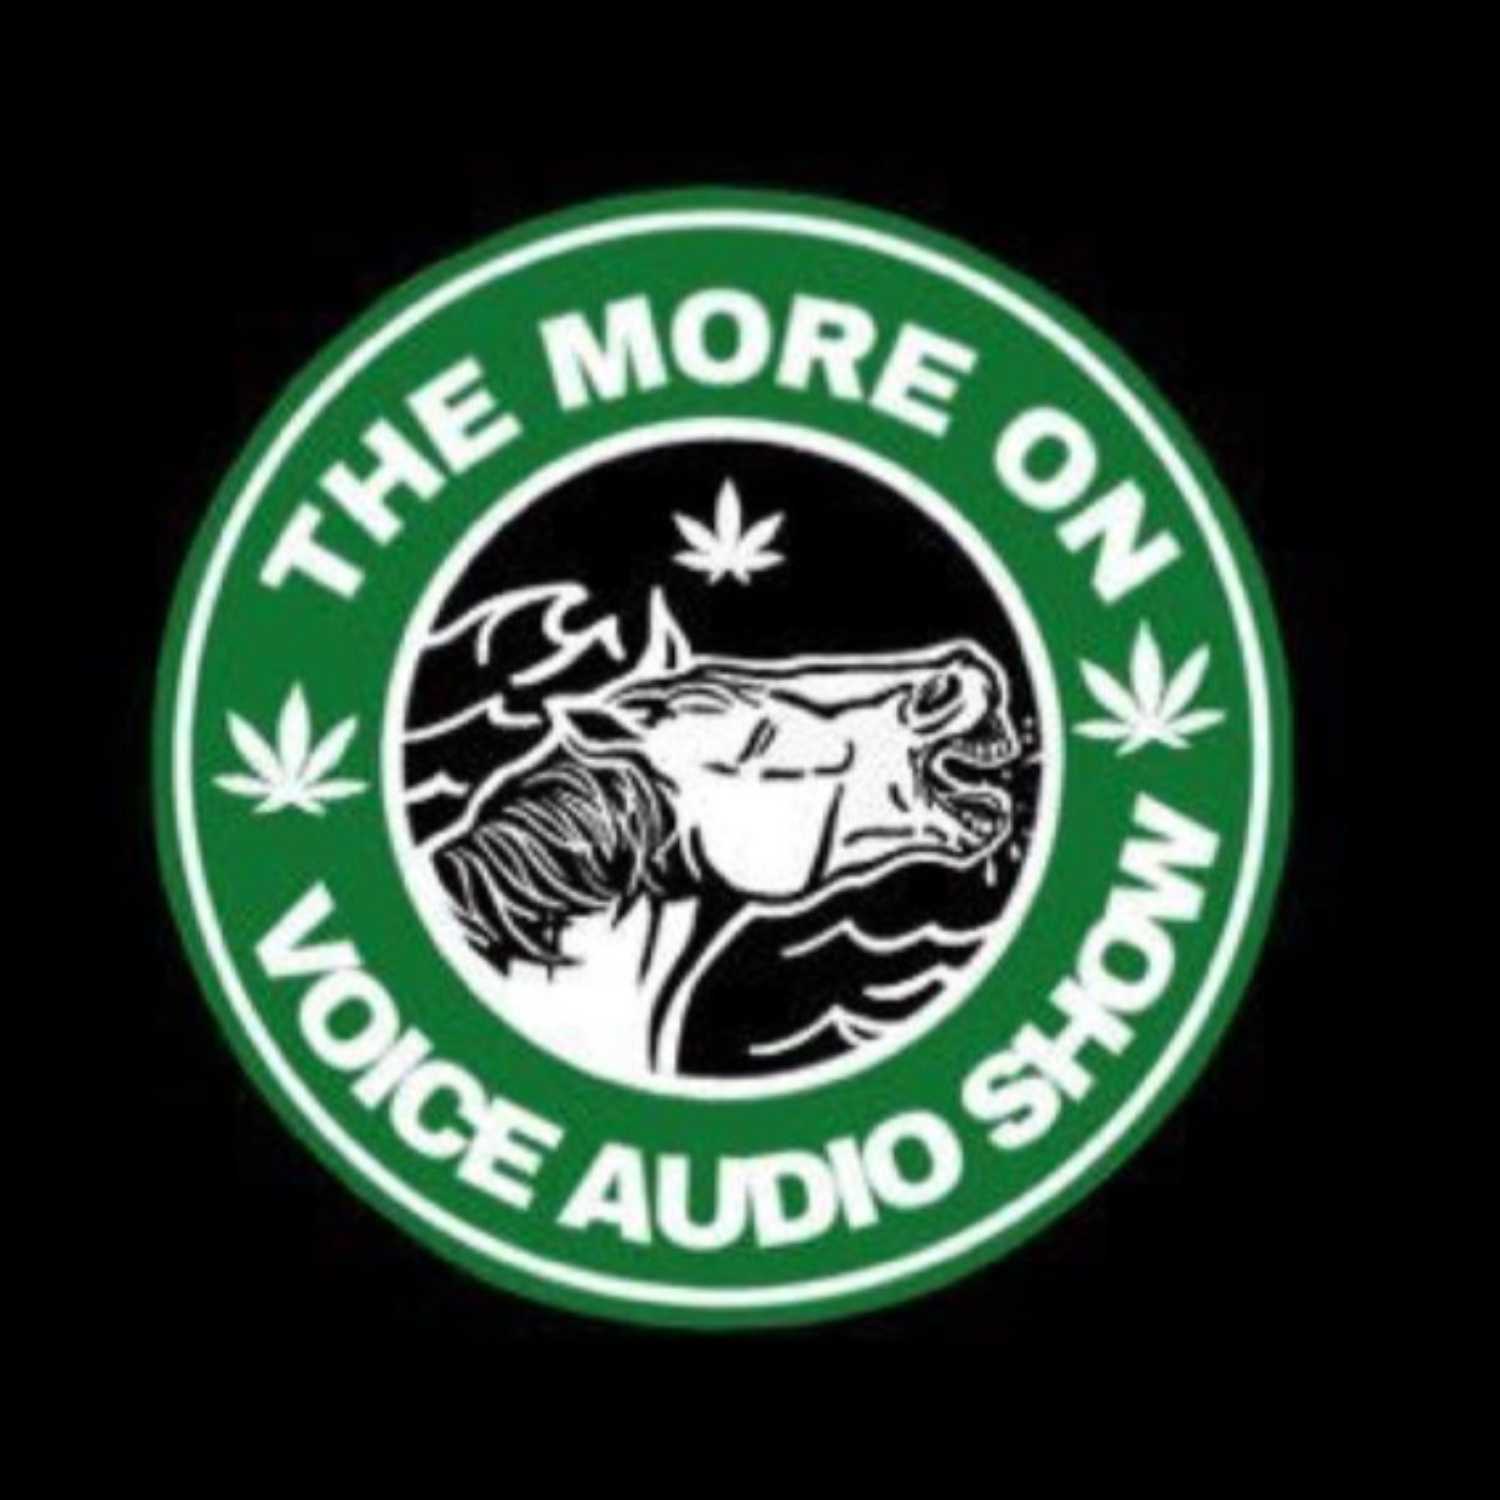 The More On Voice Audio Show: Episode 38 (Dan & Sturdy)